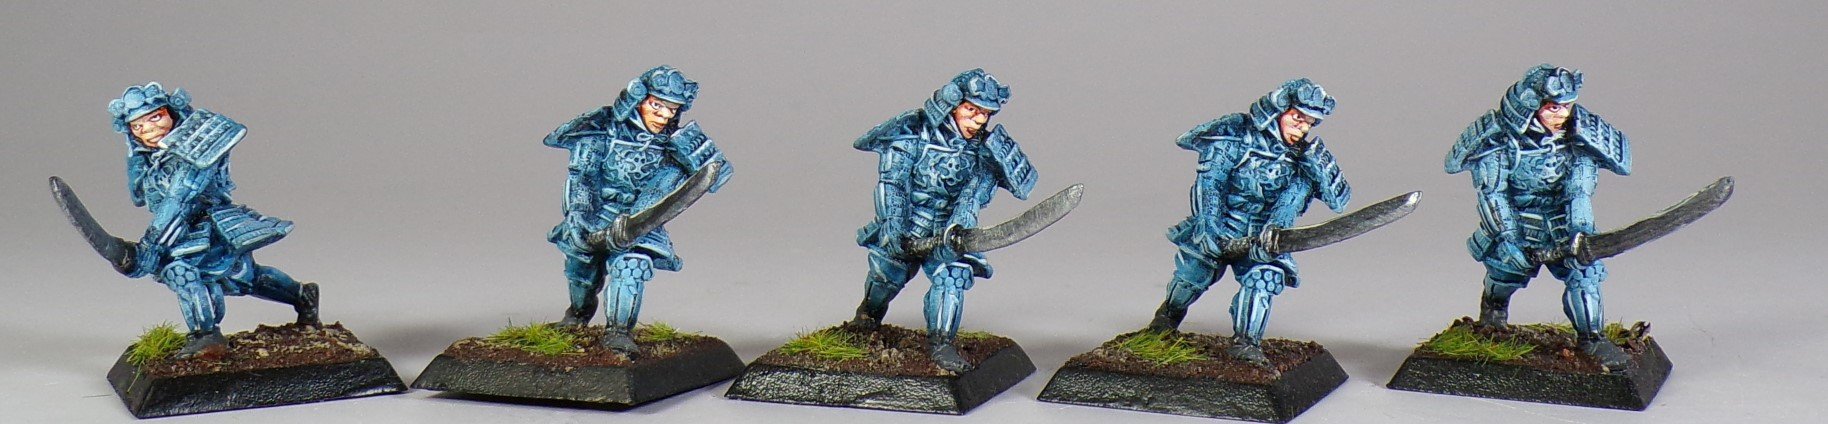 L5R Legend of the Five Rings Miniature Painting Service Paintedfigs (8).jpg